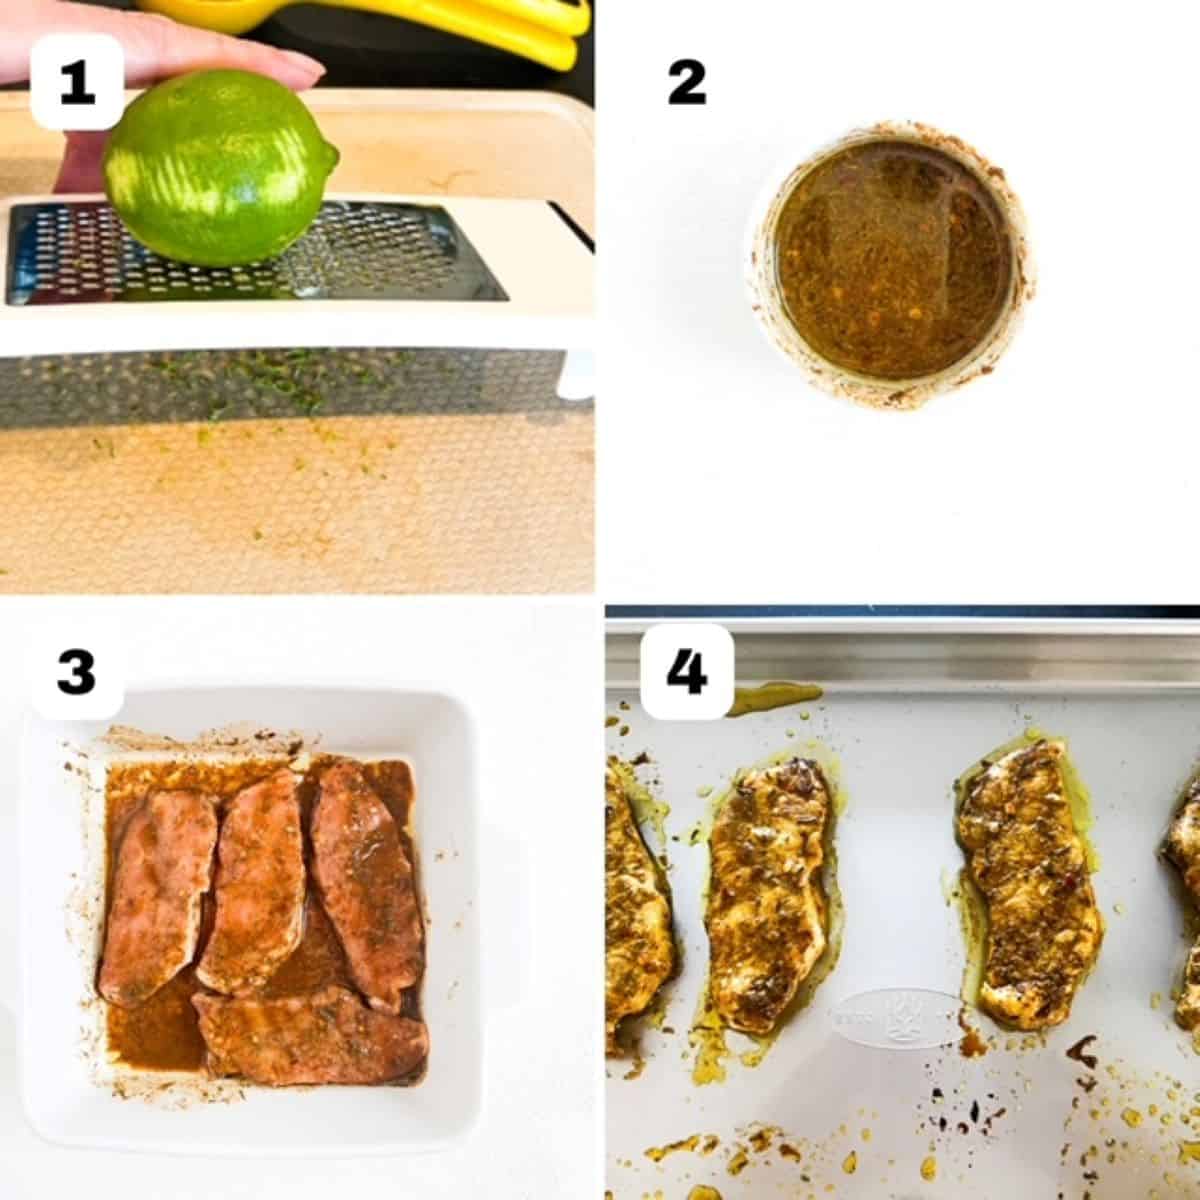 Four images showing how to make jerk lime marinated pork chops in the oven.